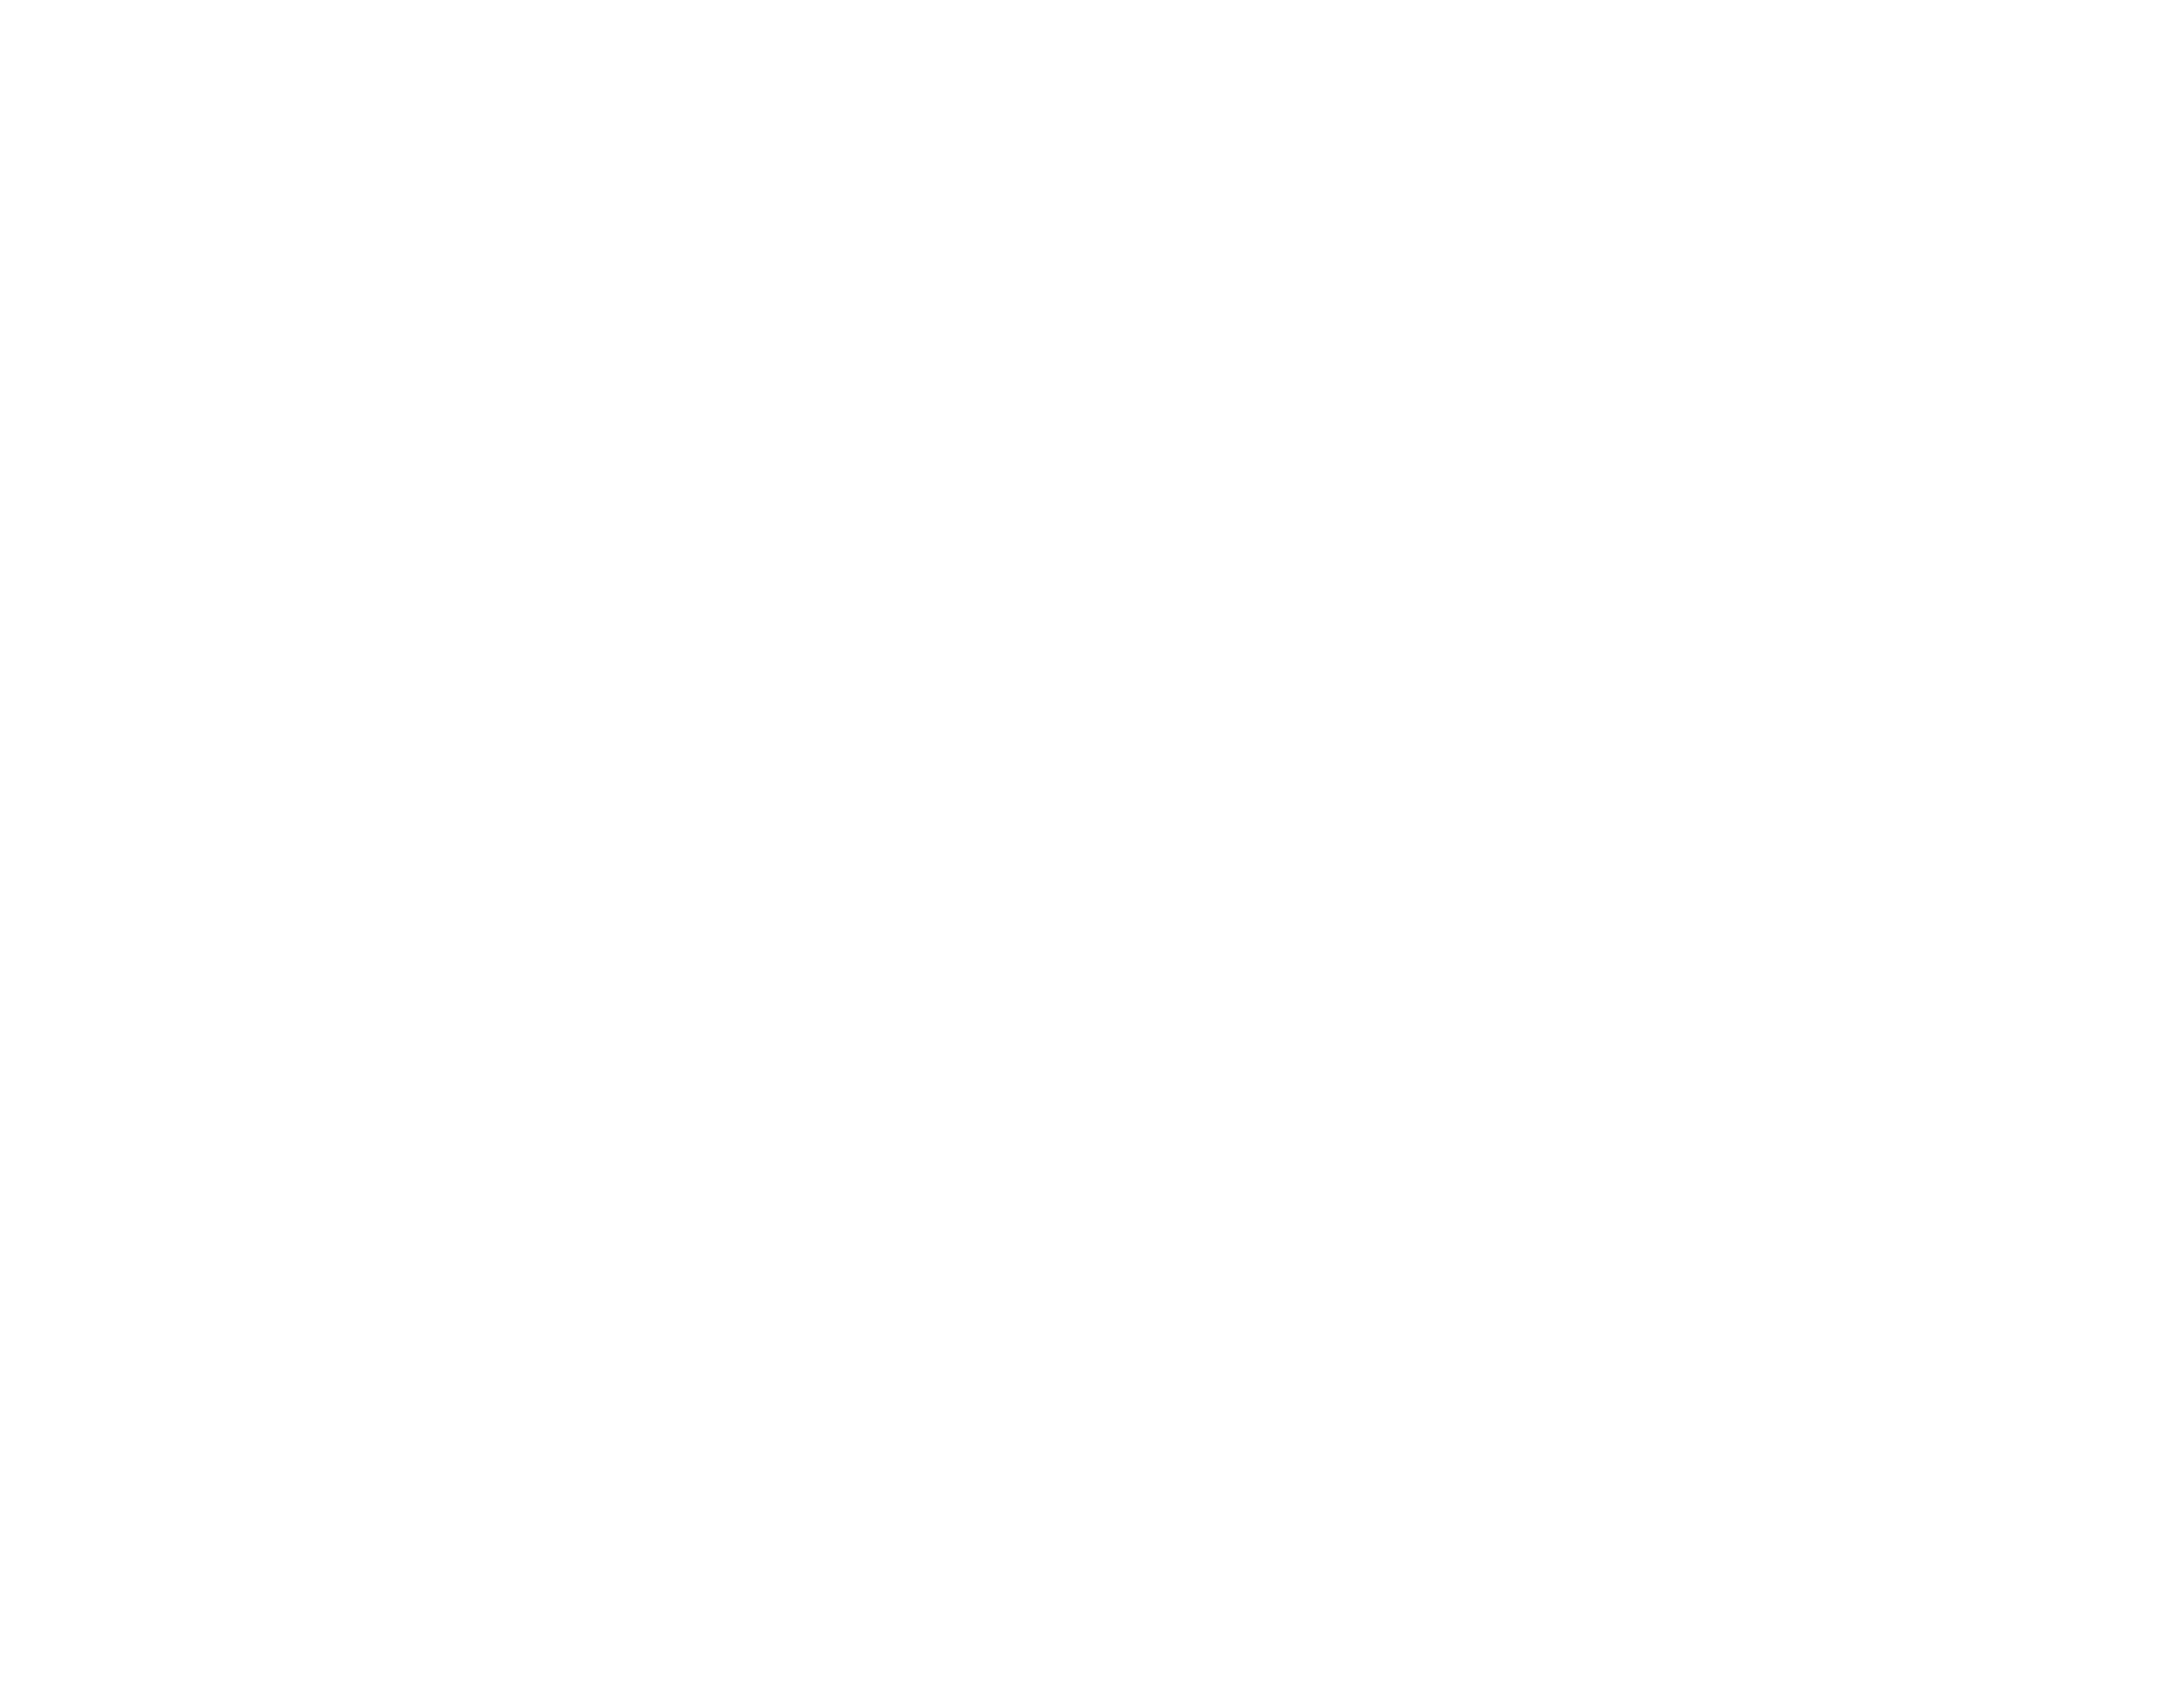 elsE Collective | Branding & Production